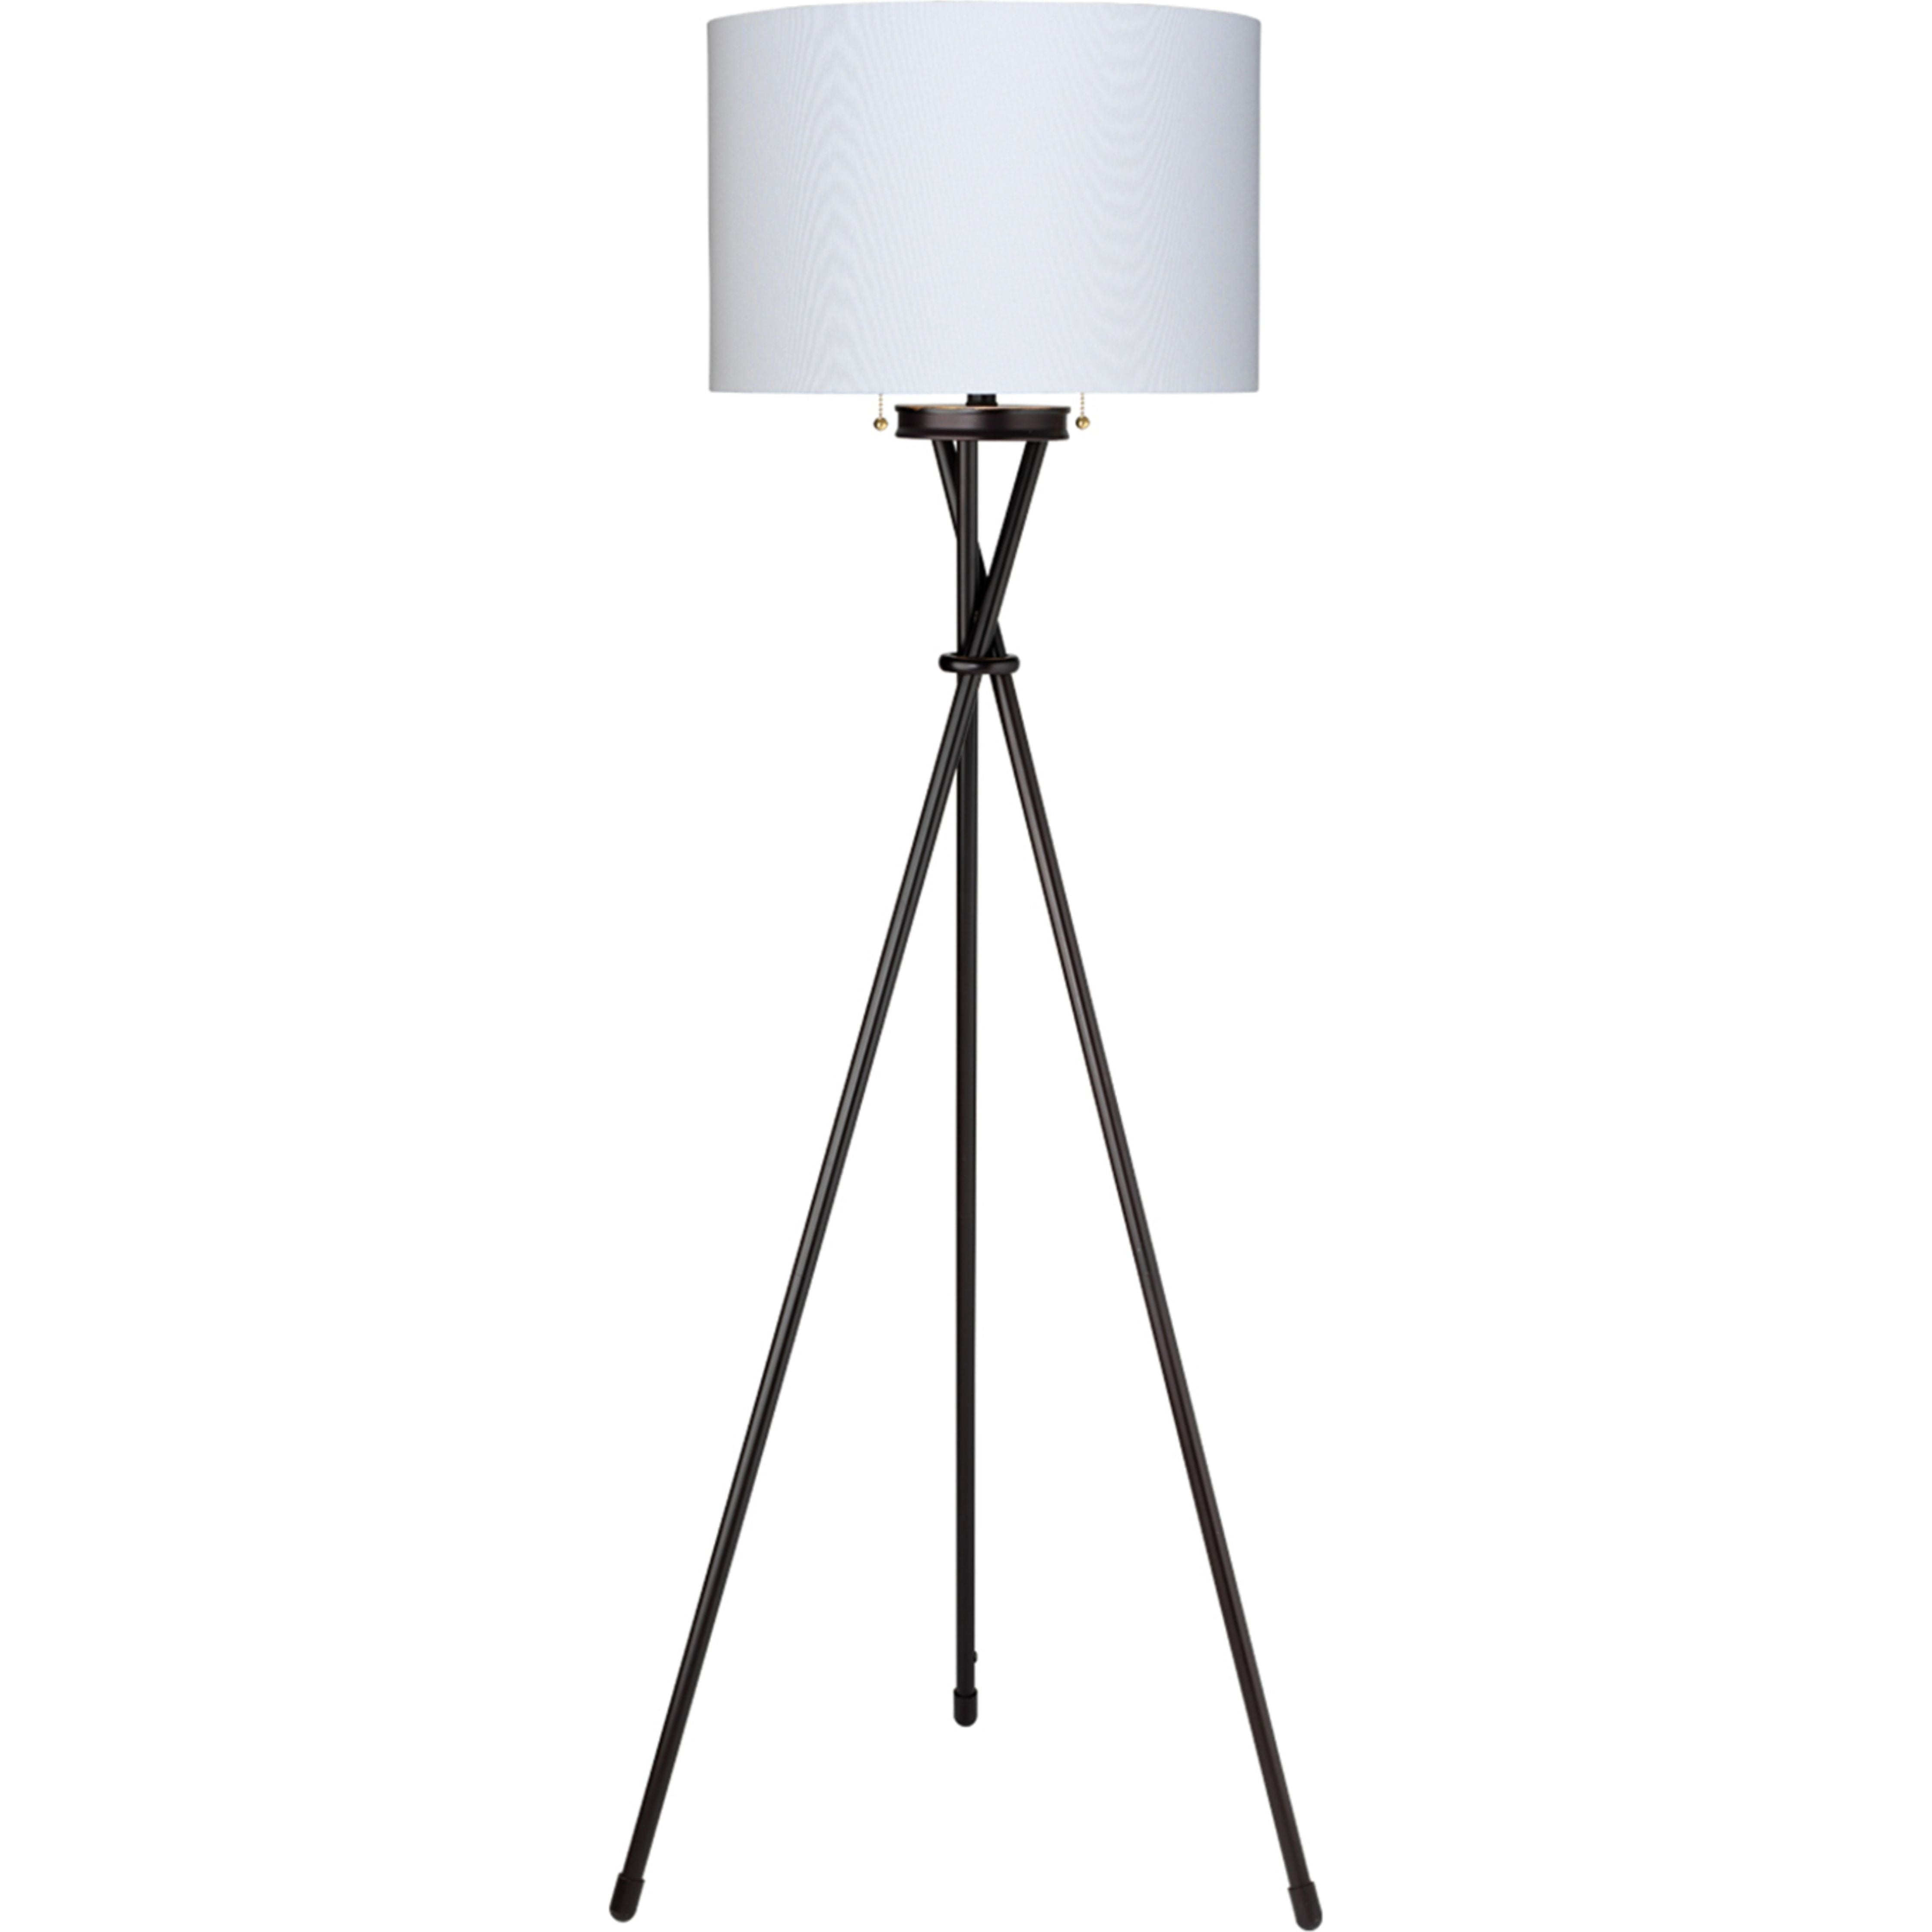 Jamie Young Company - LSMANNYIR - Manny Floor Lamp - Manny - Oil Rubbed Bronze